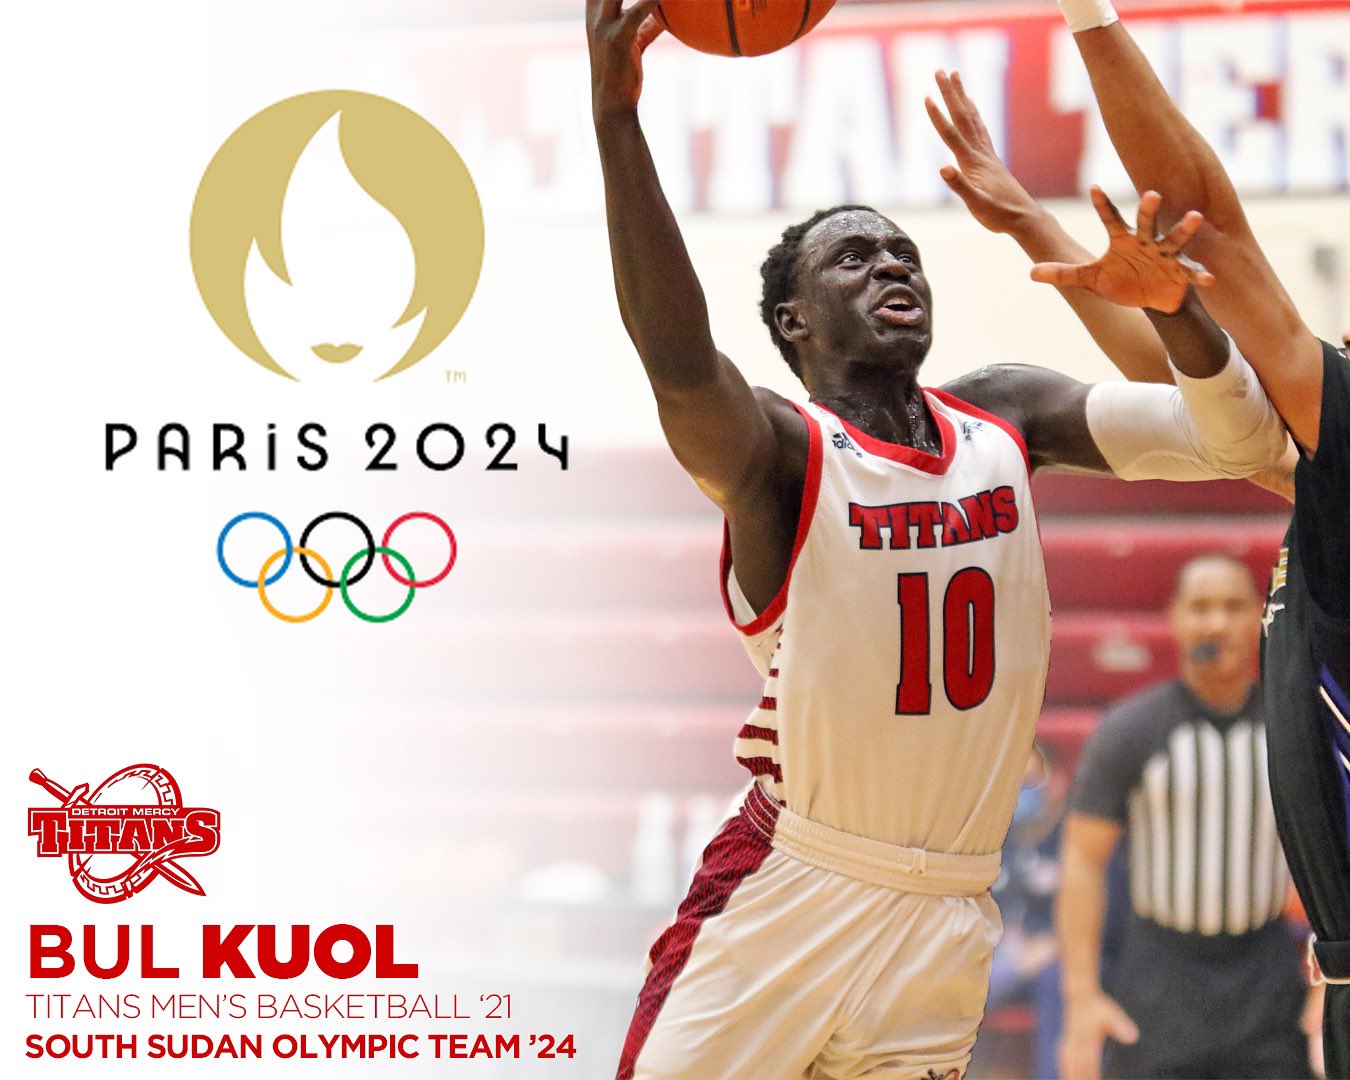 A graphic featuring Bul Kuol playing basketball. Text reads, BUL KUOL, Titans men's basketball '21, South Sudan Olympic Team '24, Paris 2024, with the Olympic rings.